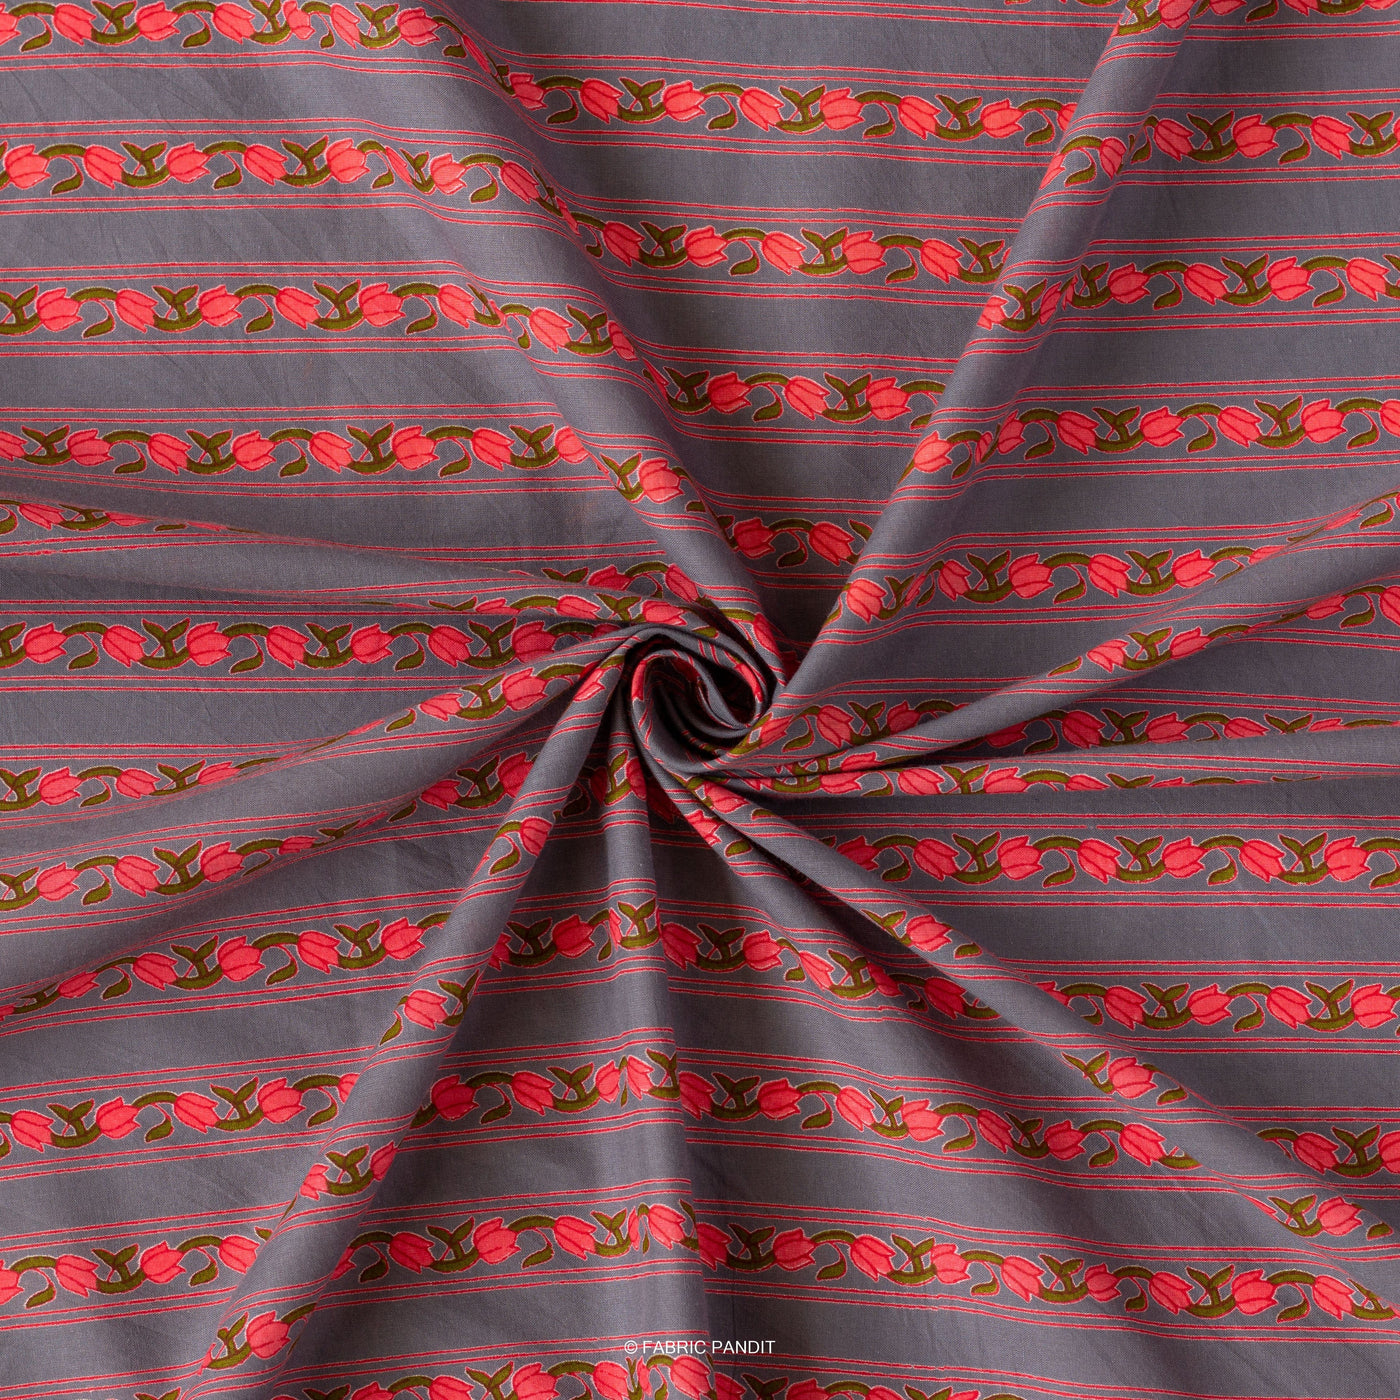 Fabric Pandit Fabric Slate Grey And Red Floral Stripes All Over Discharge Printed Pure Cotton Cambric Fabric Width (43 Inches)